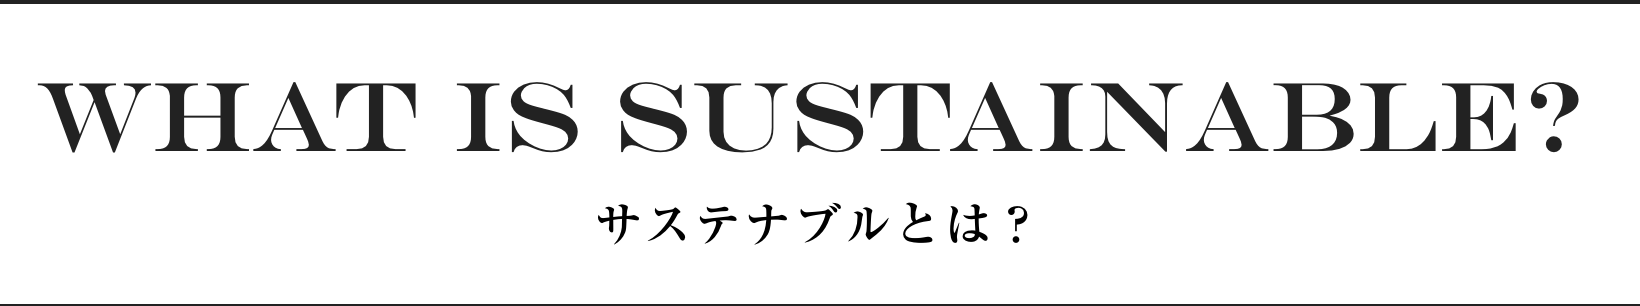 WHAT IS SUSTAINABLE? サステナブルとは？